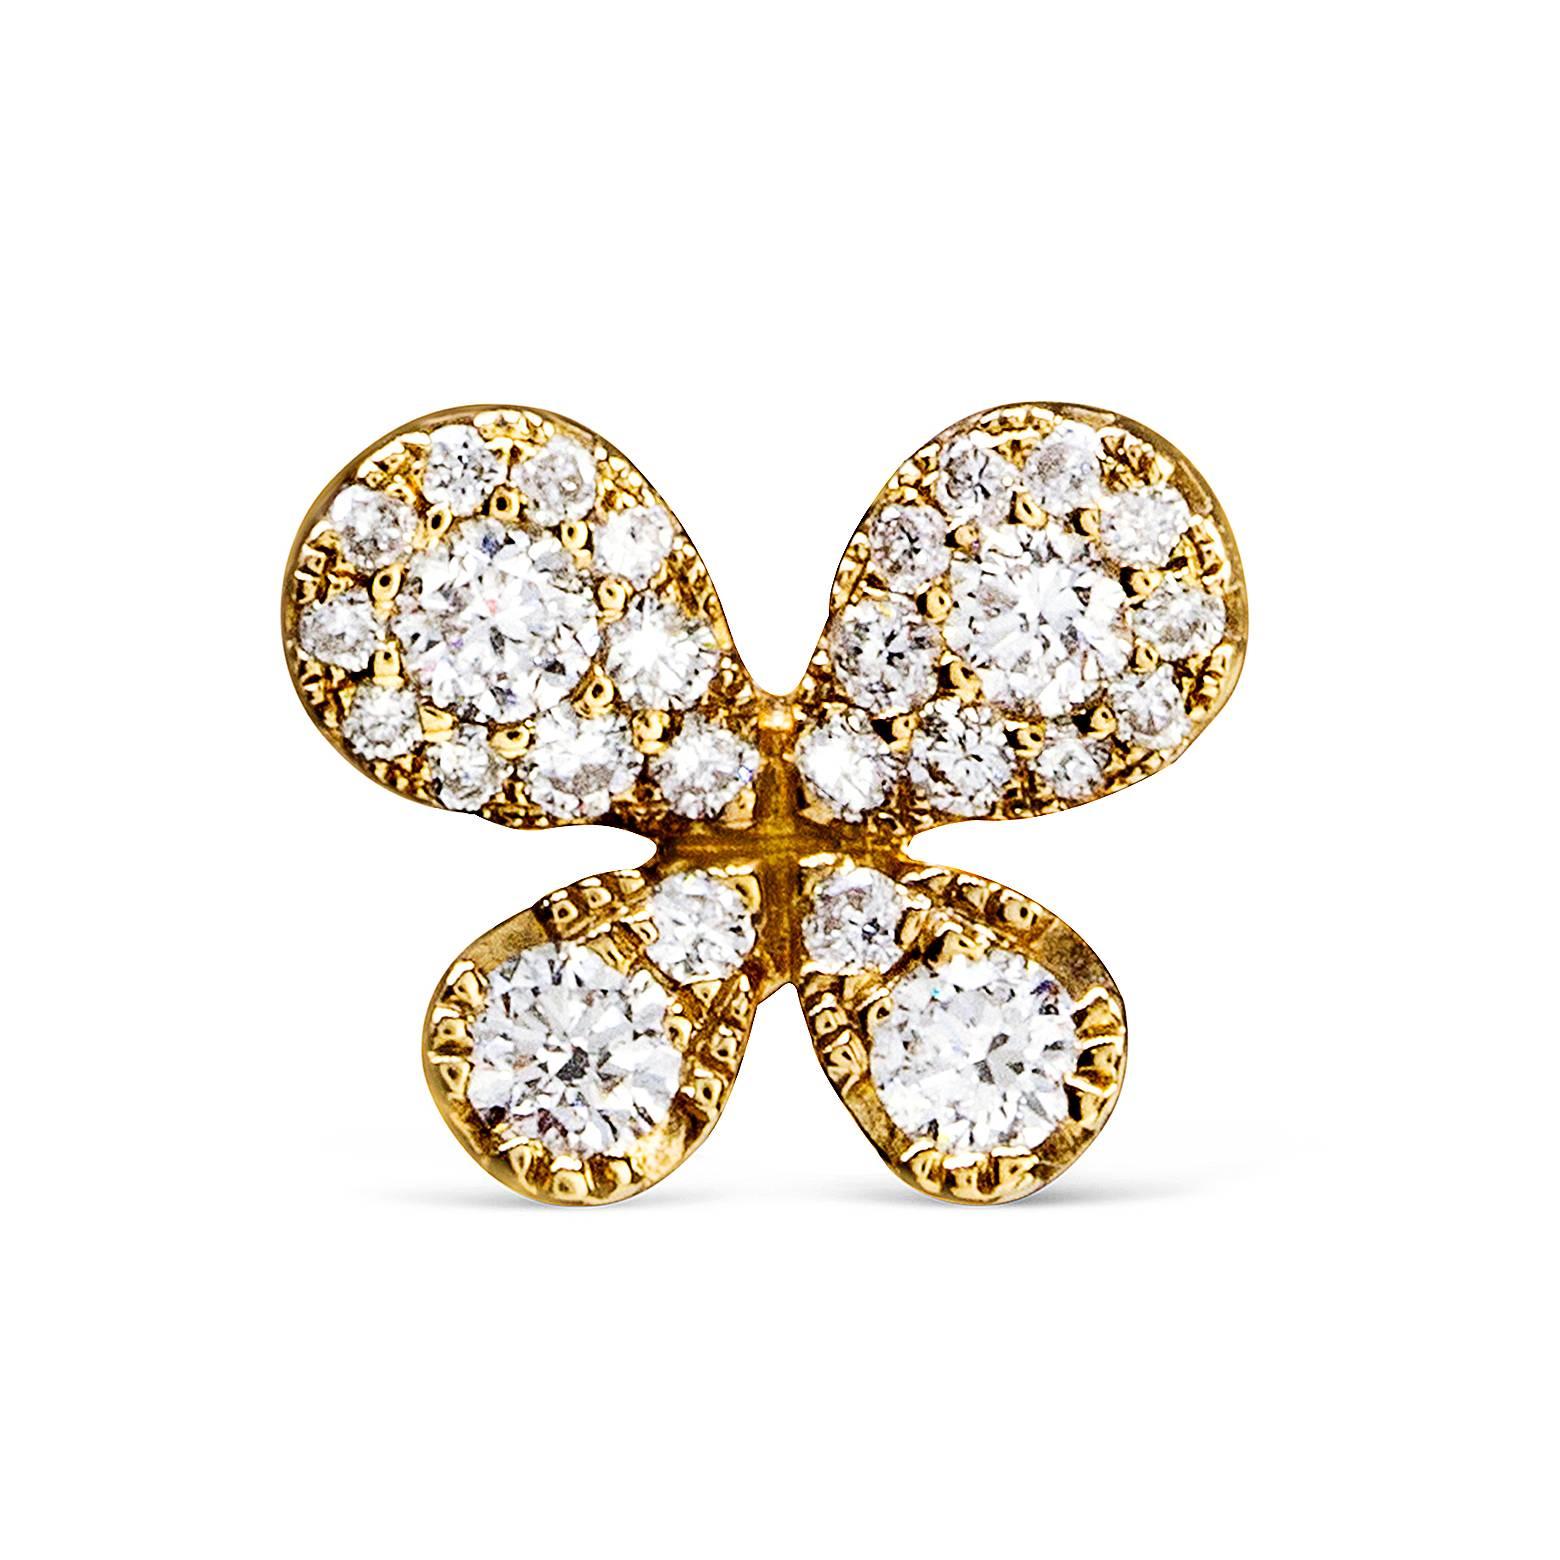 A gorgeous pair of stud earrings shaped like an elegant butterfly. Set with sparkling round diamonds weighing 0.39 carats total on 18k rose gold. 

Style available in different price ranges. Prices are based on your selection of the 4C’s (Carat,